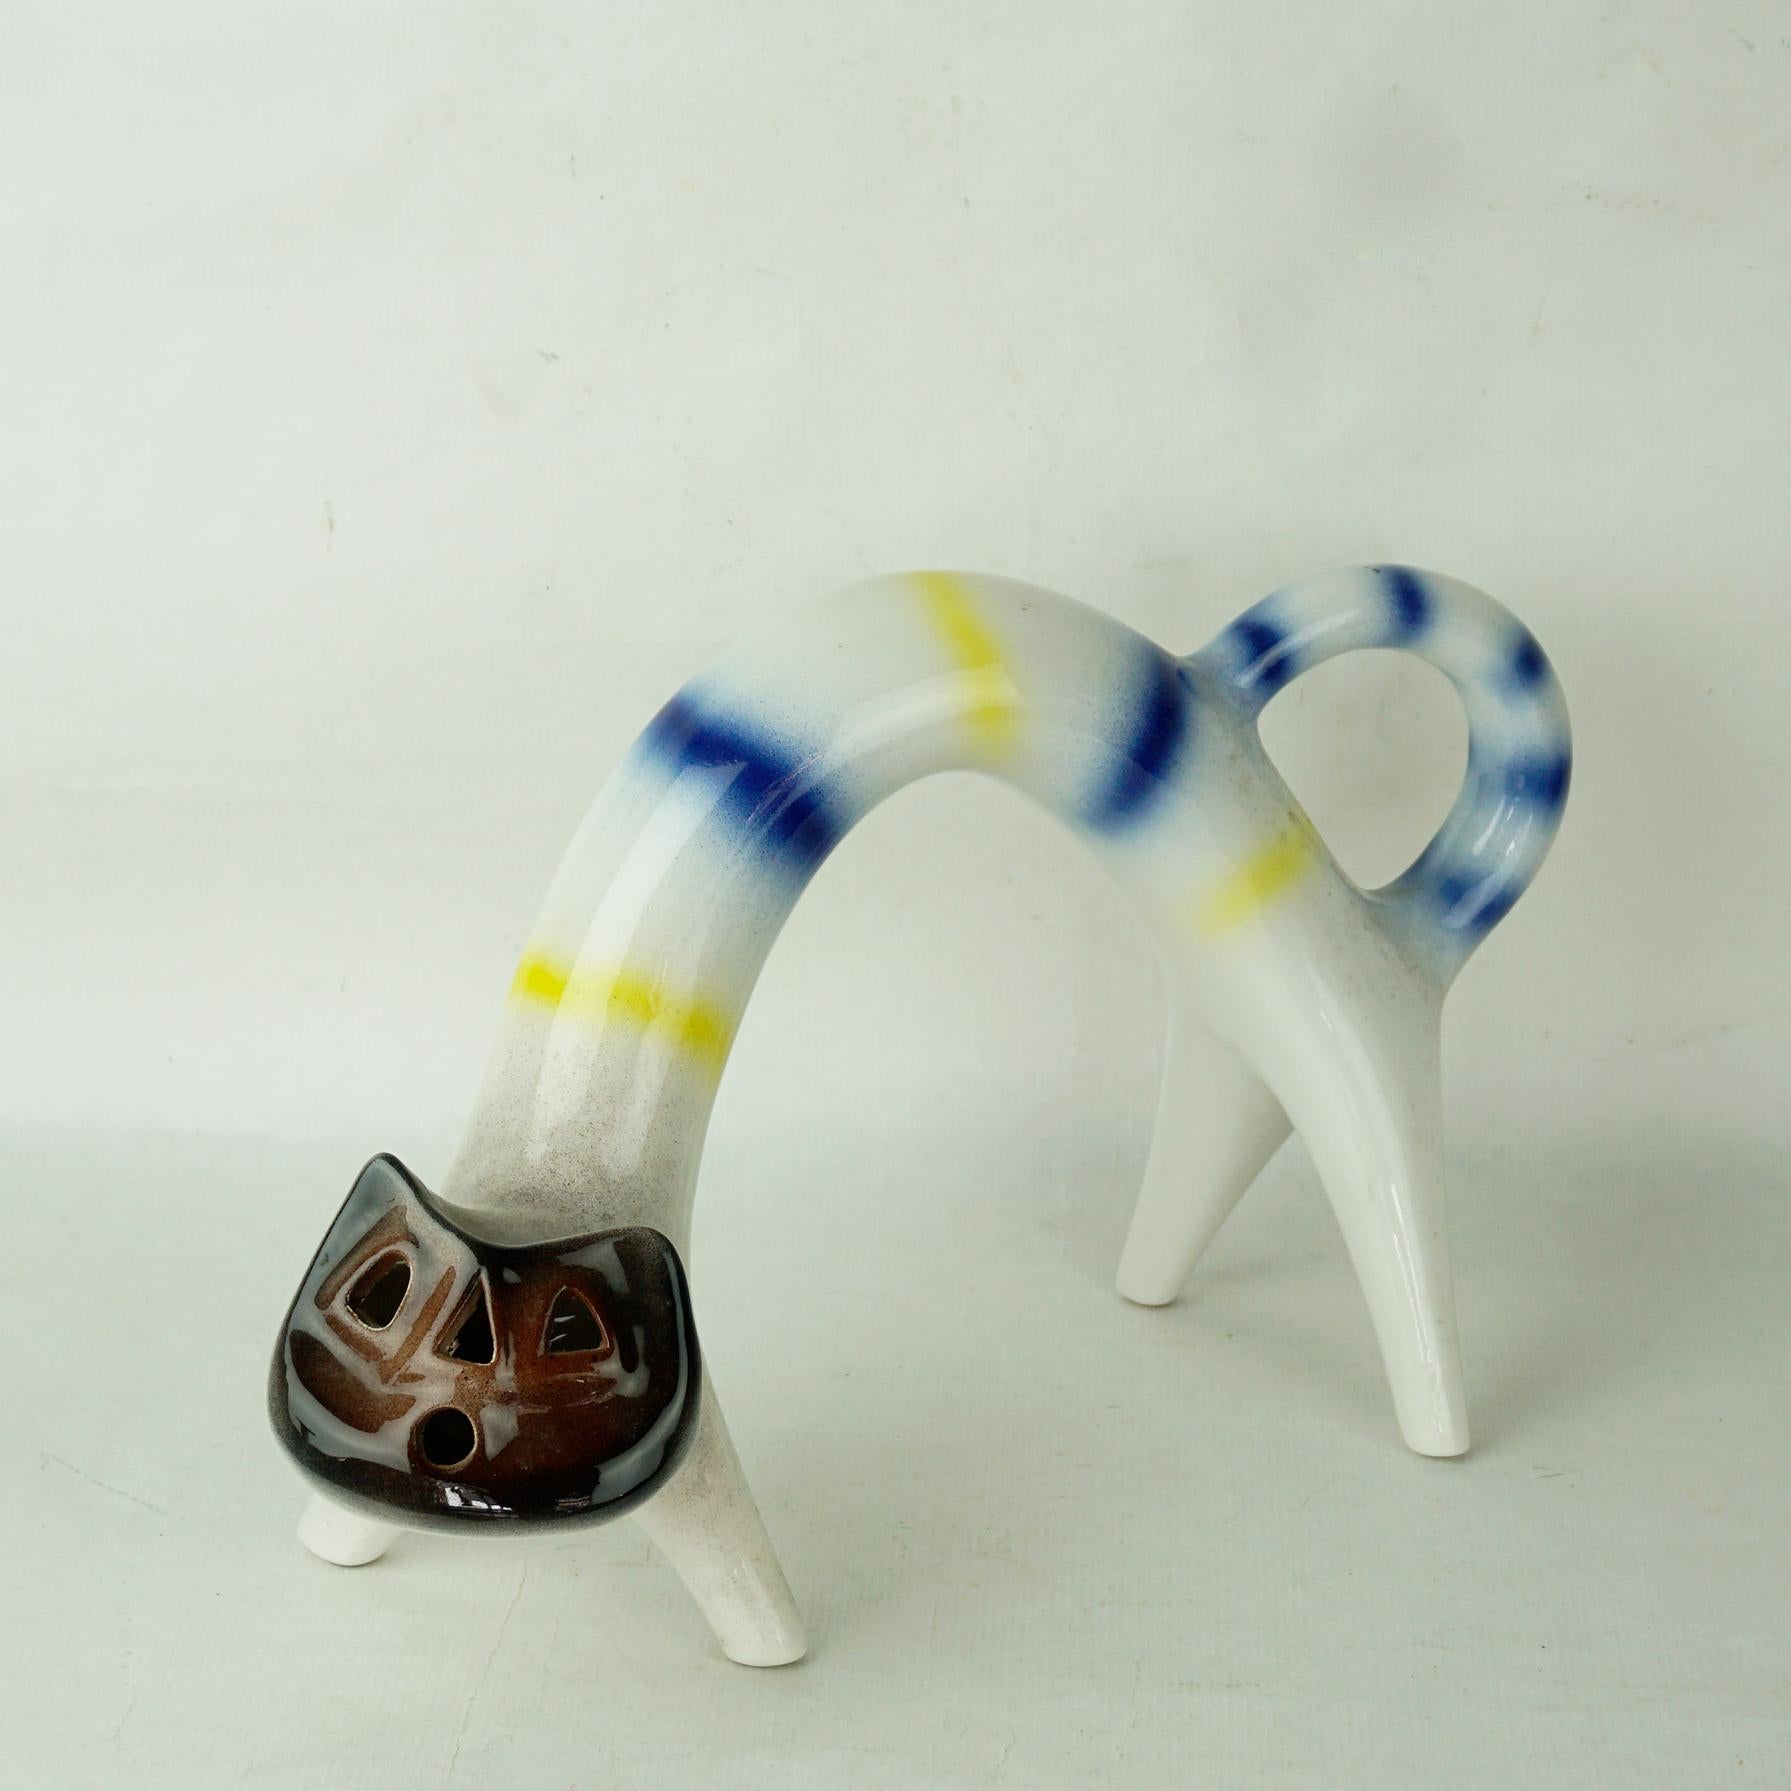 Charming Italian modern ceramic cat sculpture from the 1960s designed and manufactured by Roberto Rigon, marked with RR on the underside and in beautiful condition. It features a fantastic multicolored striped glaze in yellow and blue colour over a